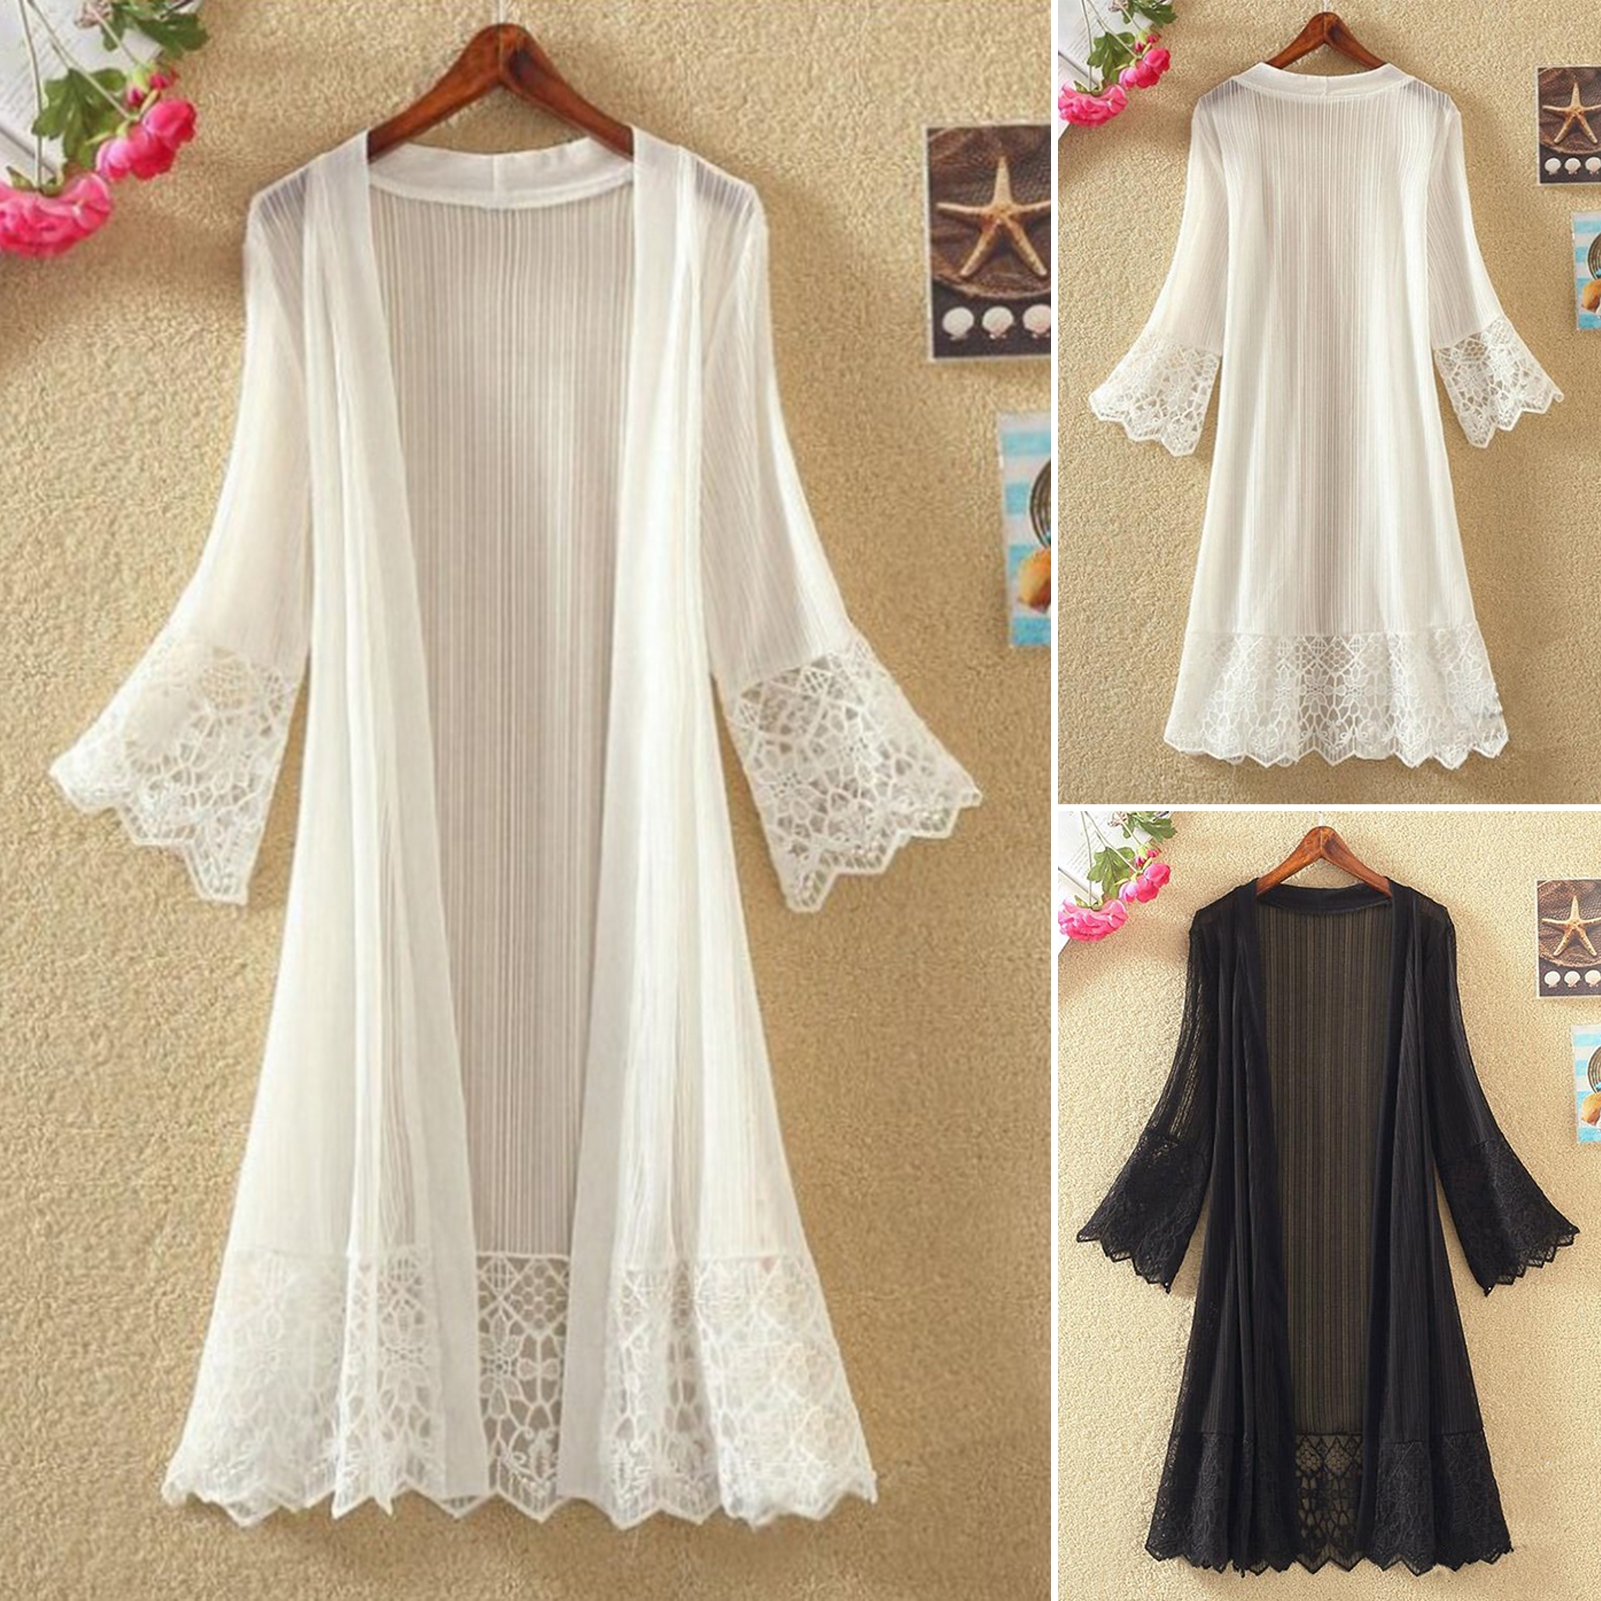 sunsanly Summer Cardigan Mid Long See-through Lace Open Front Sheer Sun ...